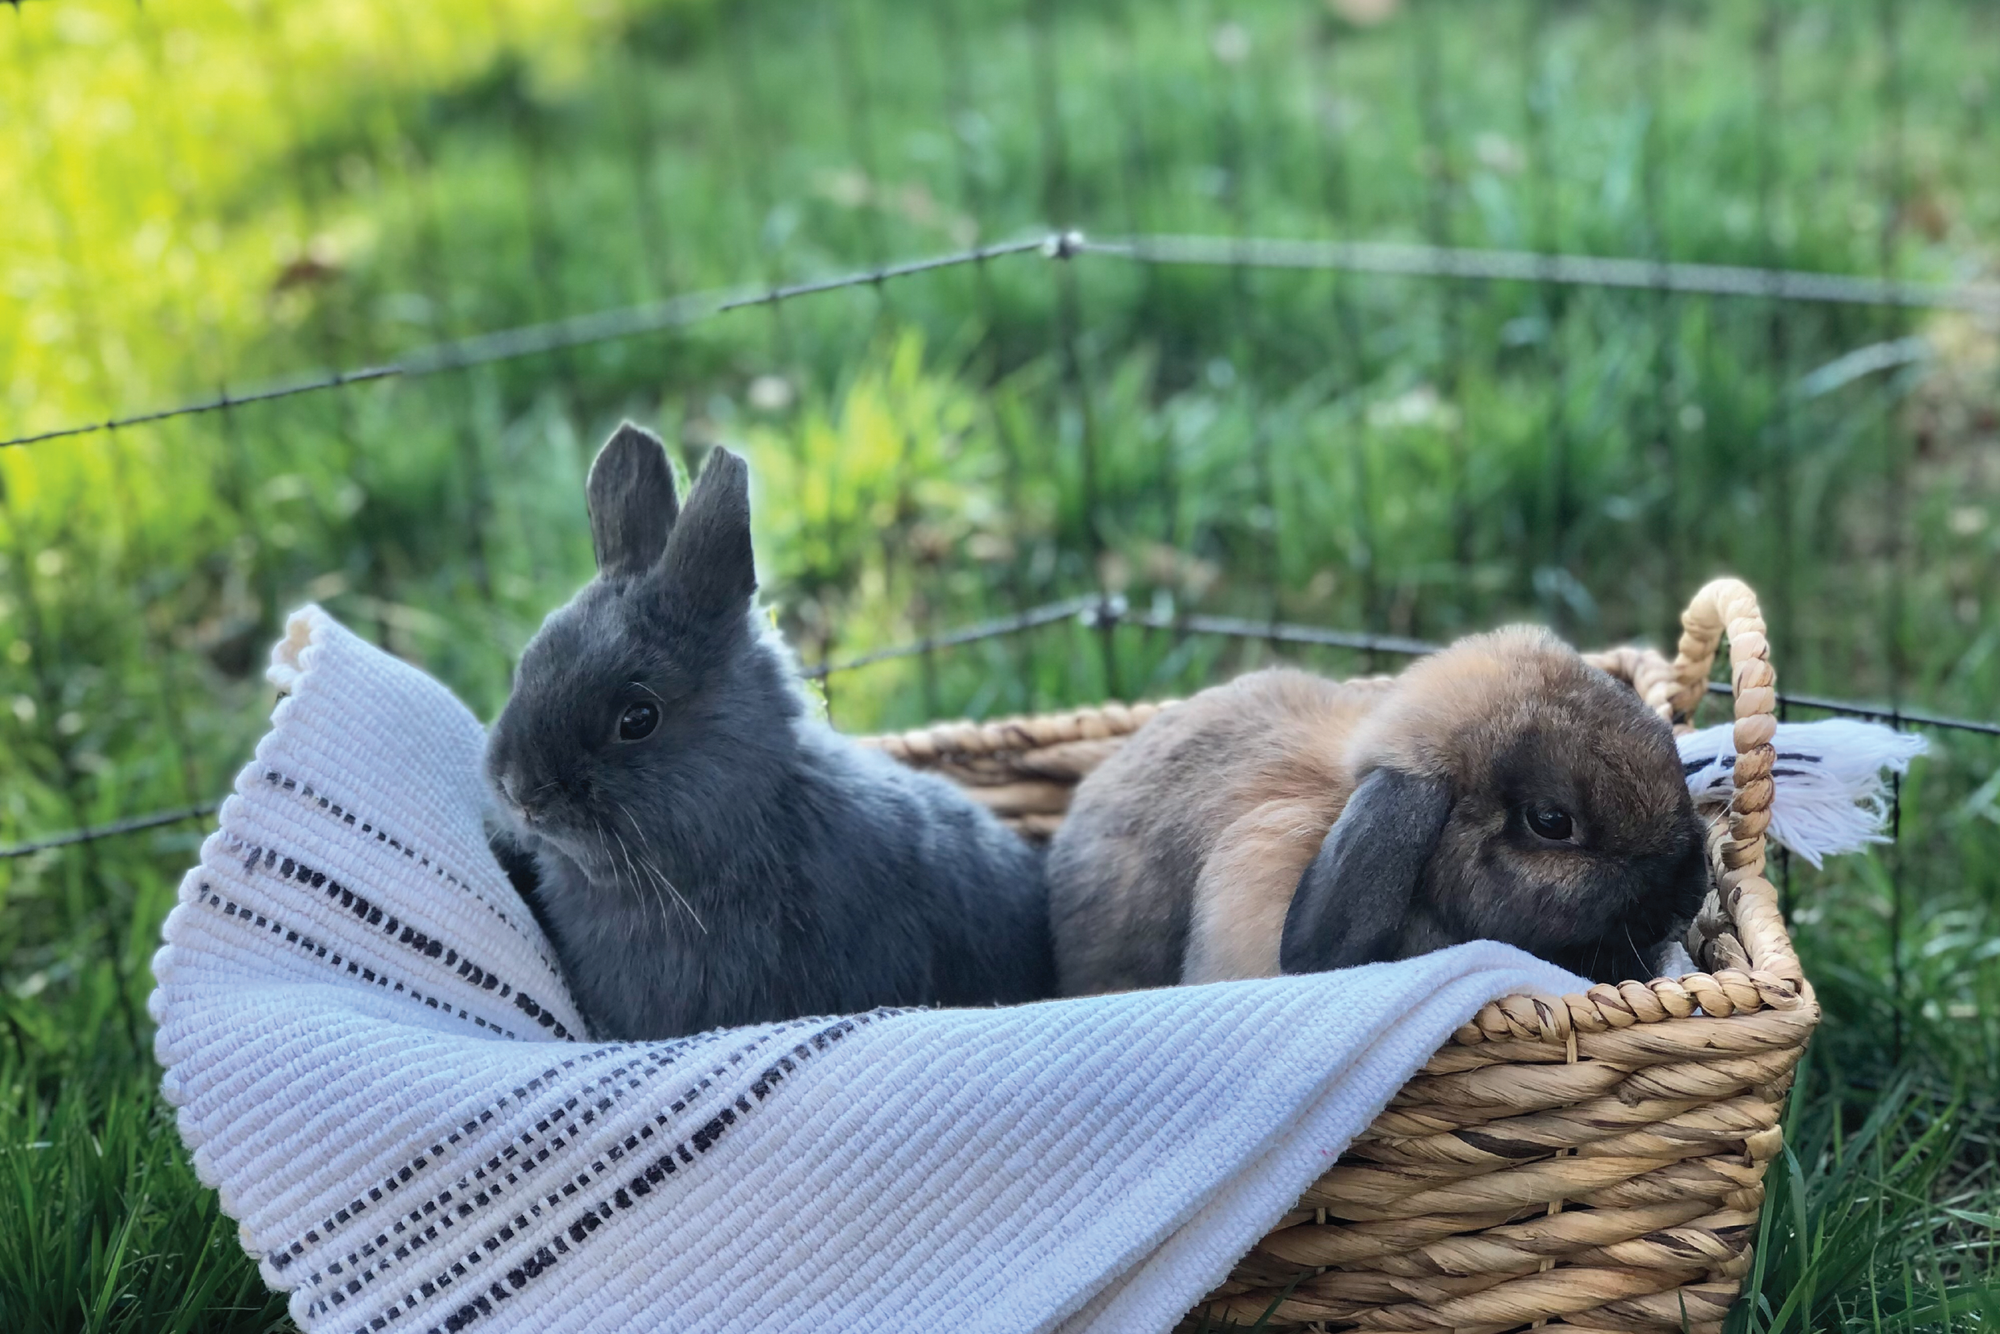 Bunny snuggles are a wonderful gift for anyone! Enjoy a 30 minute private bunny snuggling session with our Netherland Dwarf bunny, Kip, and our miniature Holland Lop, Naomi!